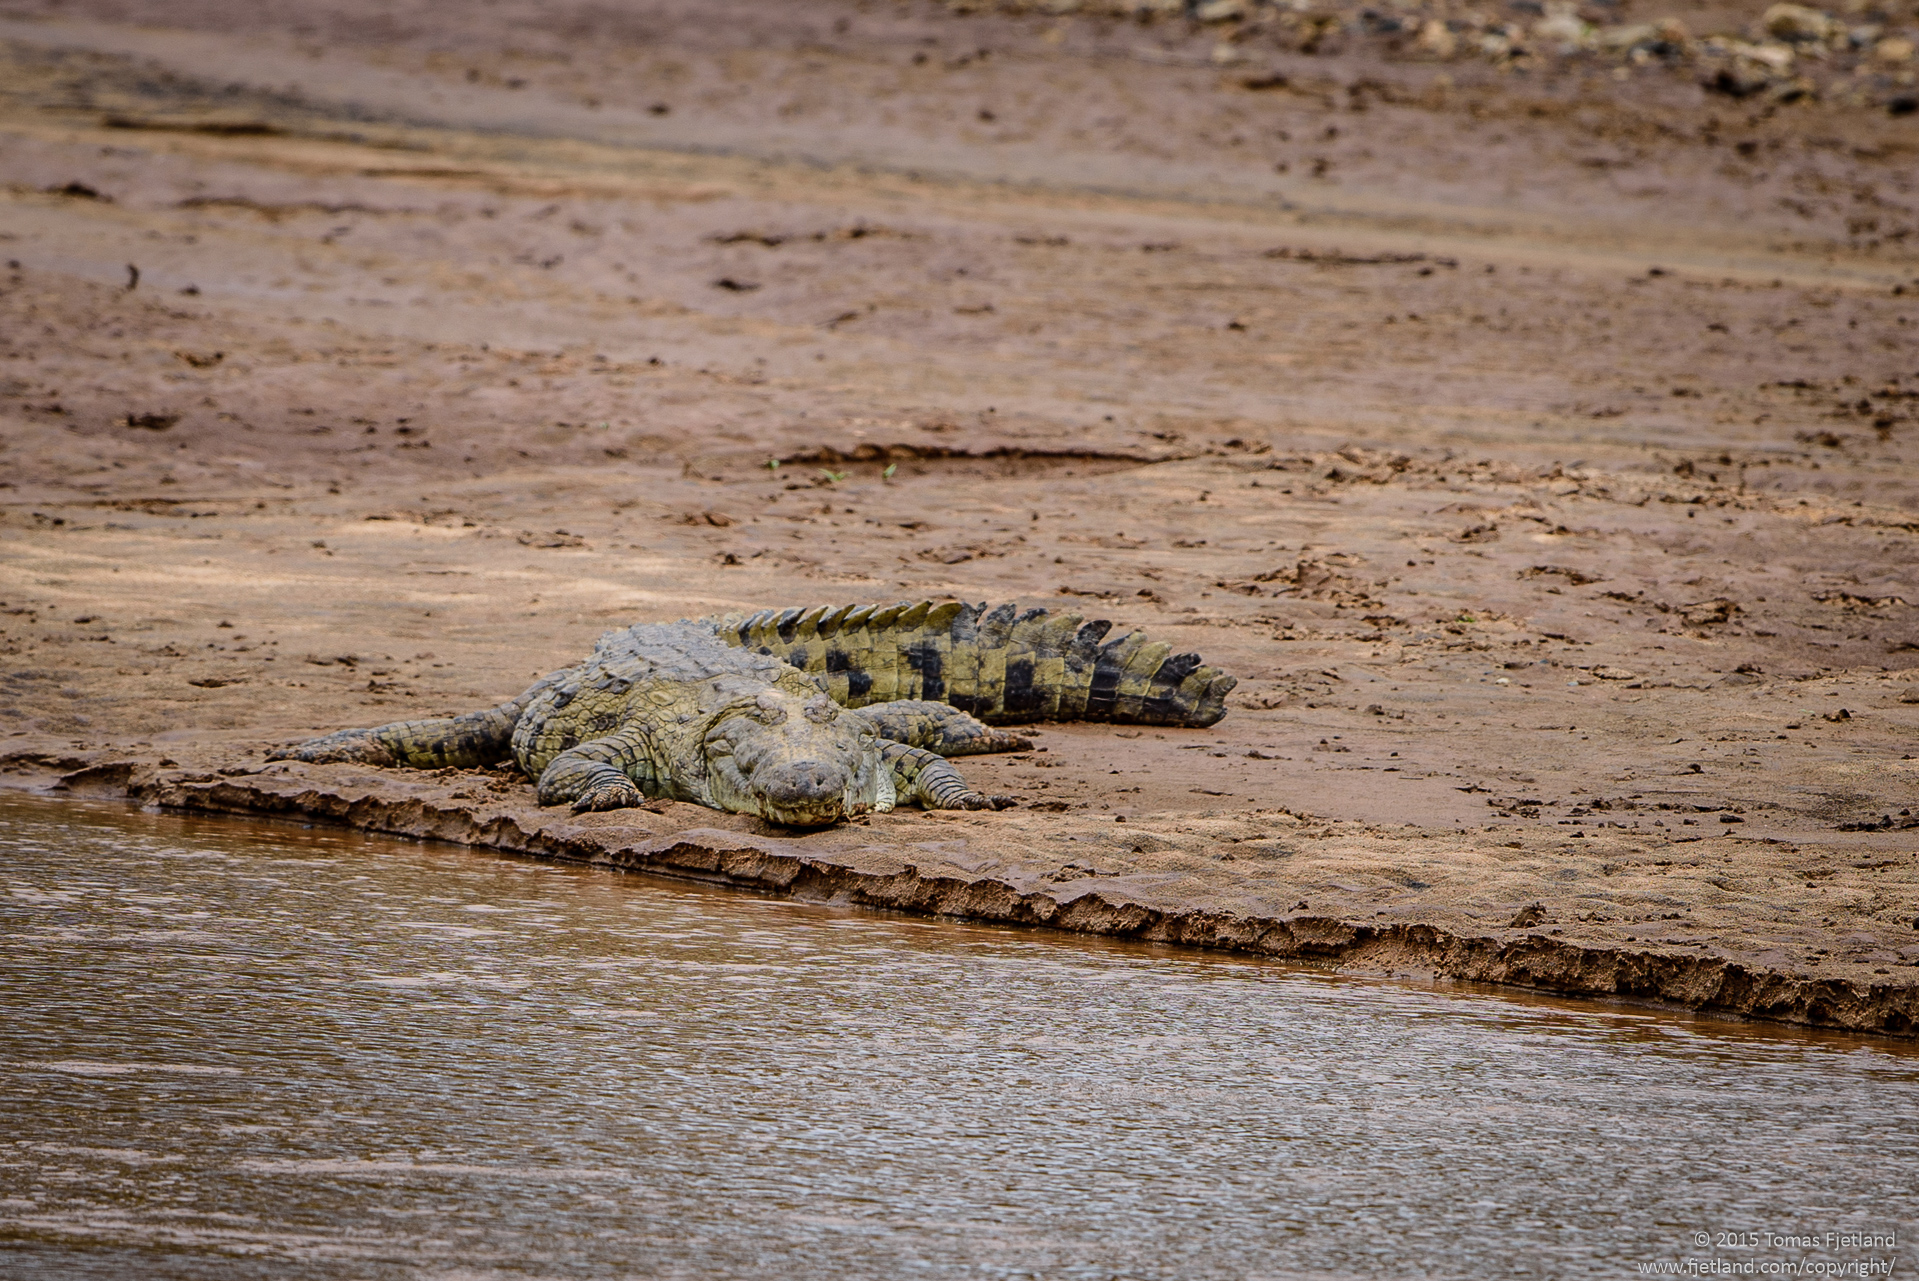 A fairly large Nile crocodile on the opposite bank from the camp. You could see them on the opposite side now and then, but they seem to rarely come out of the water on the camp side